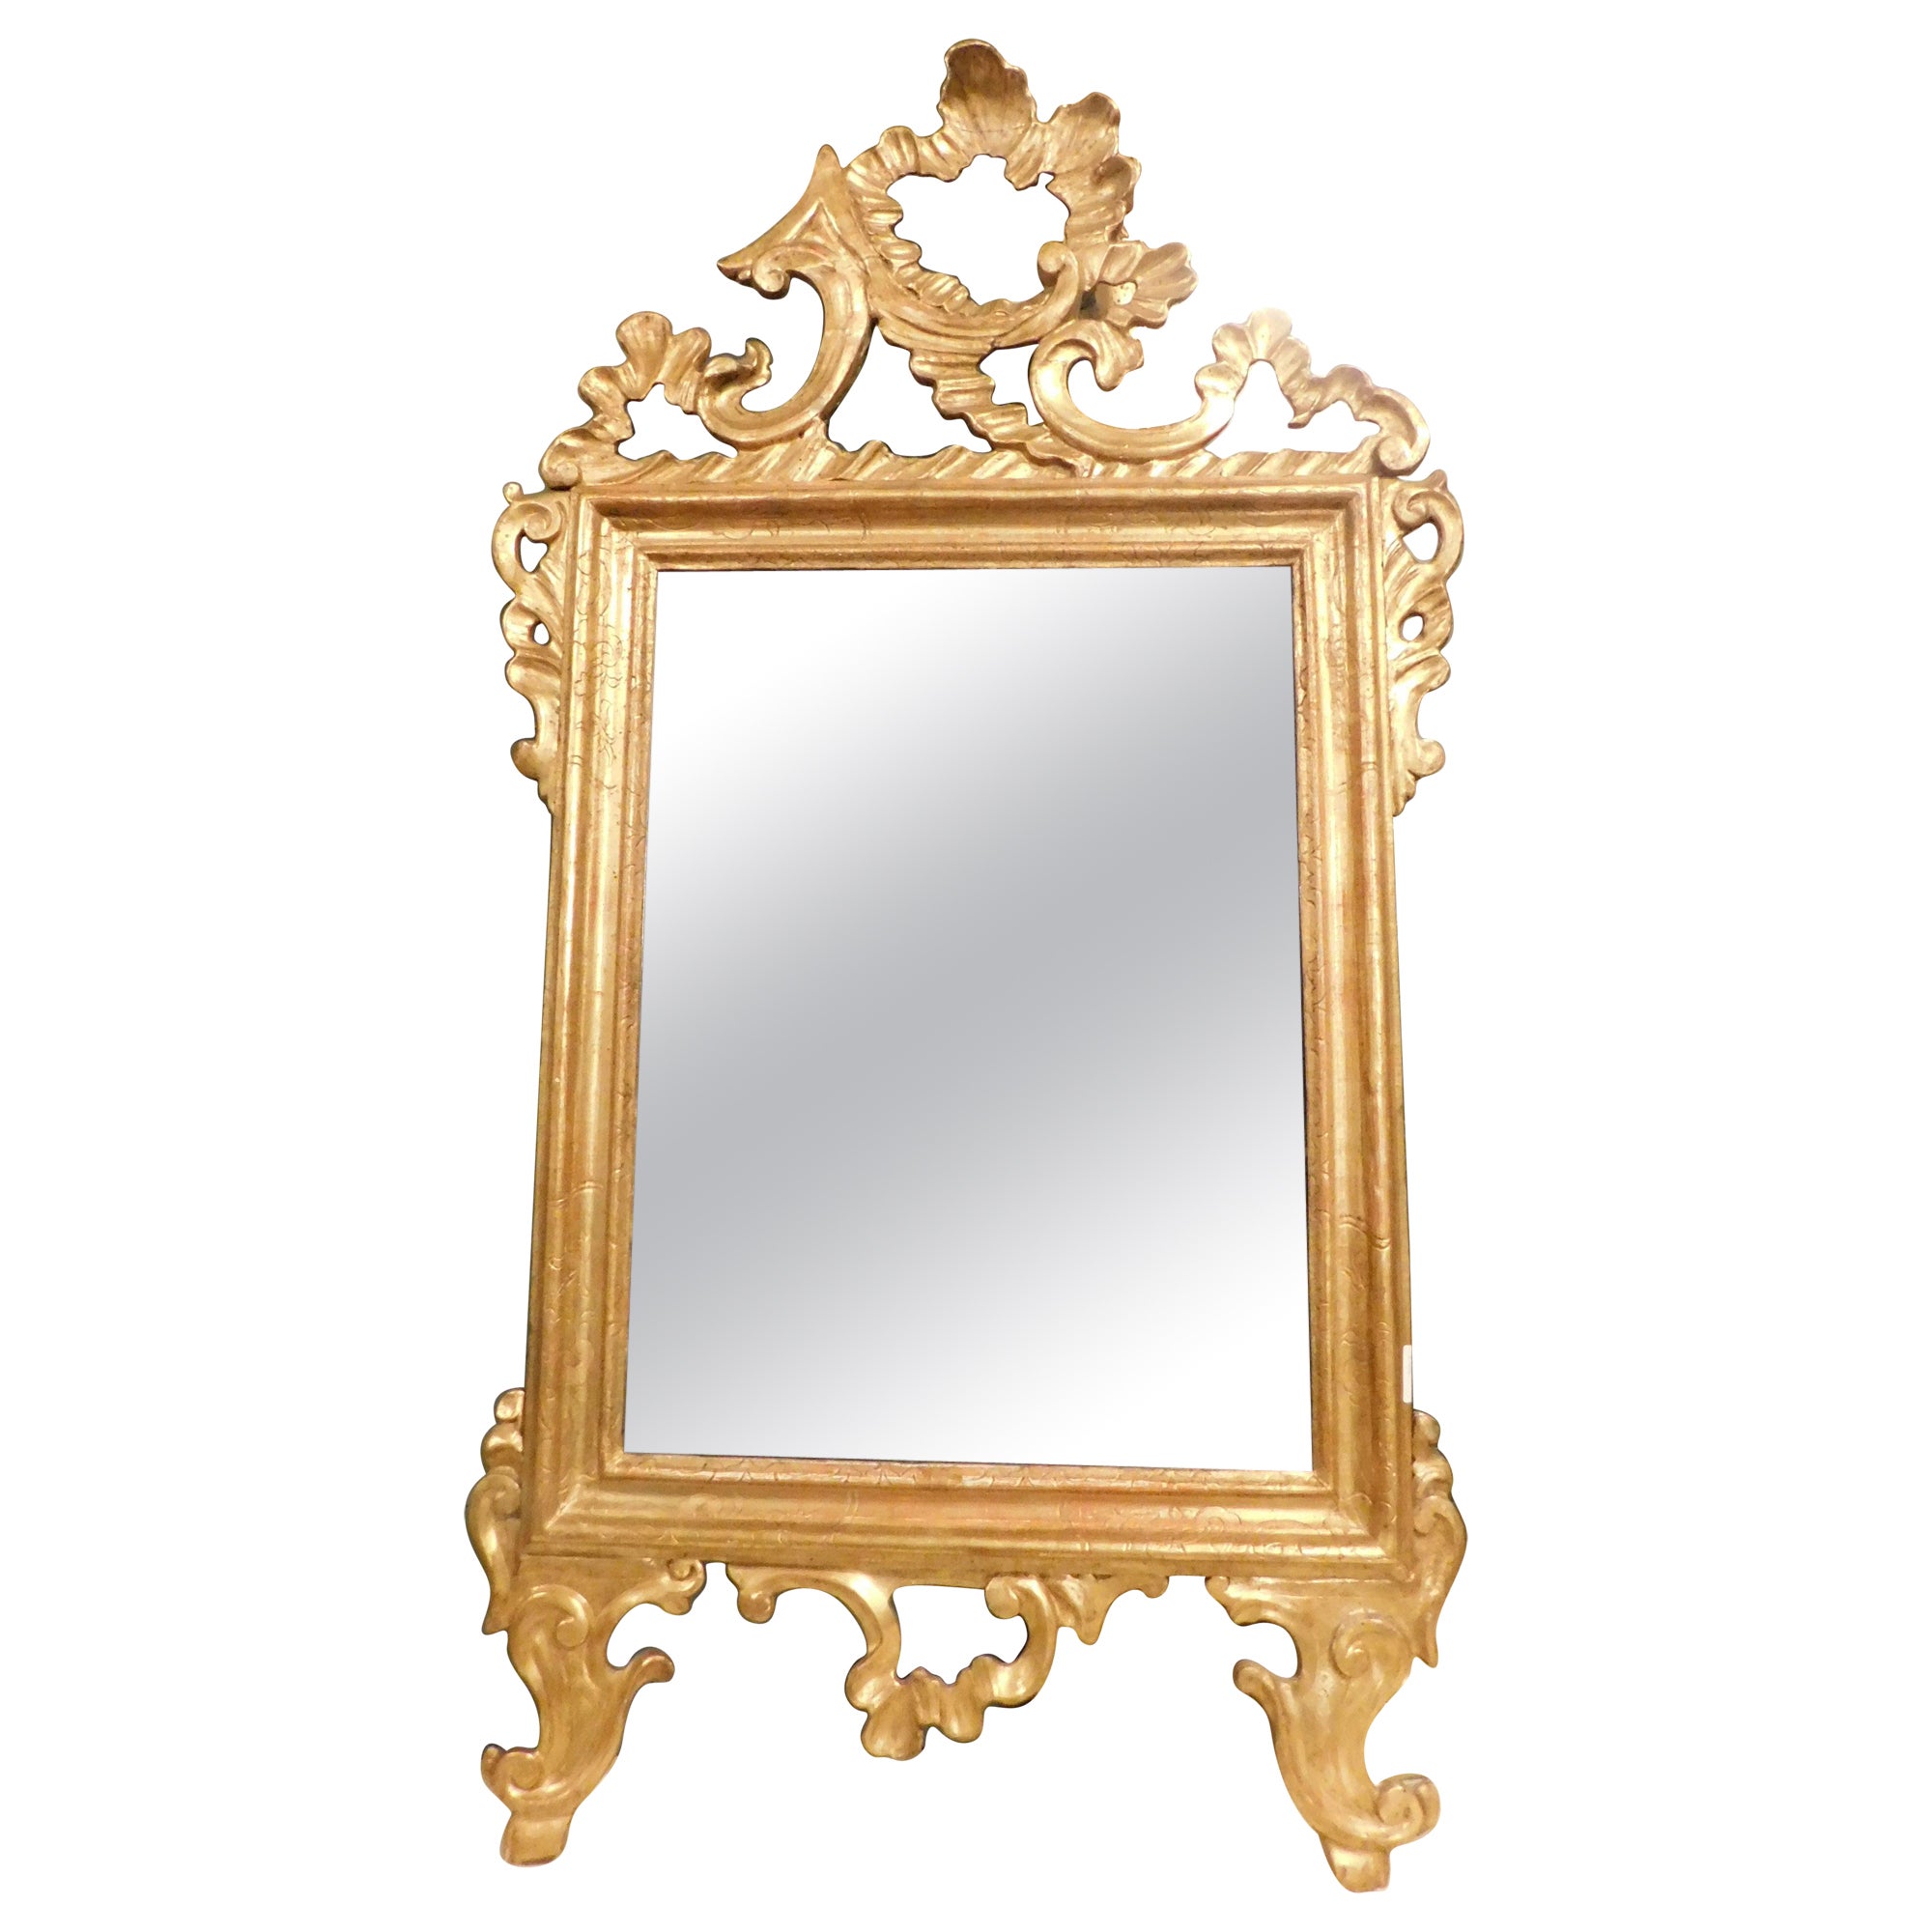 Ancient mirror in gilded and carved wood, France